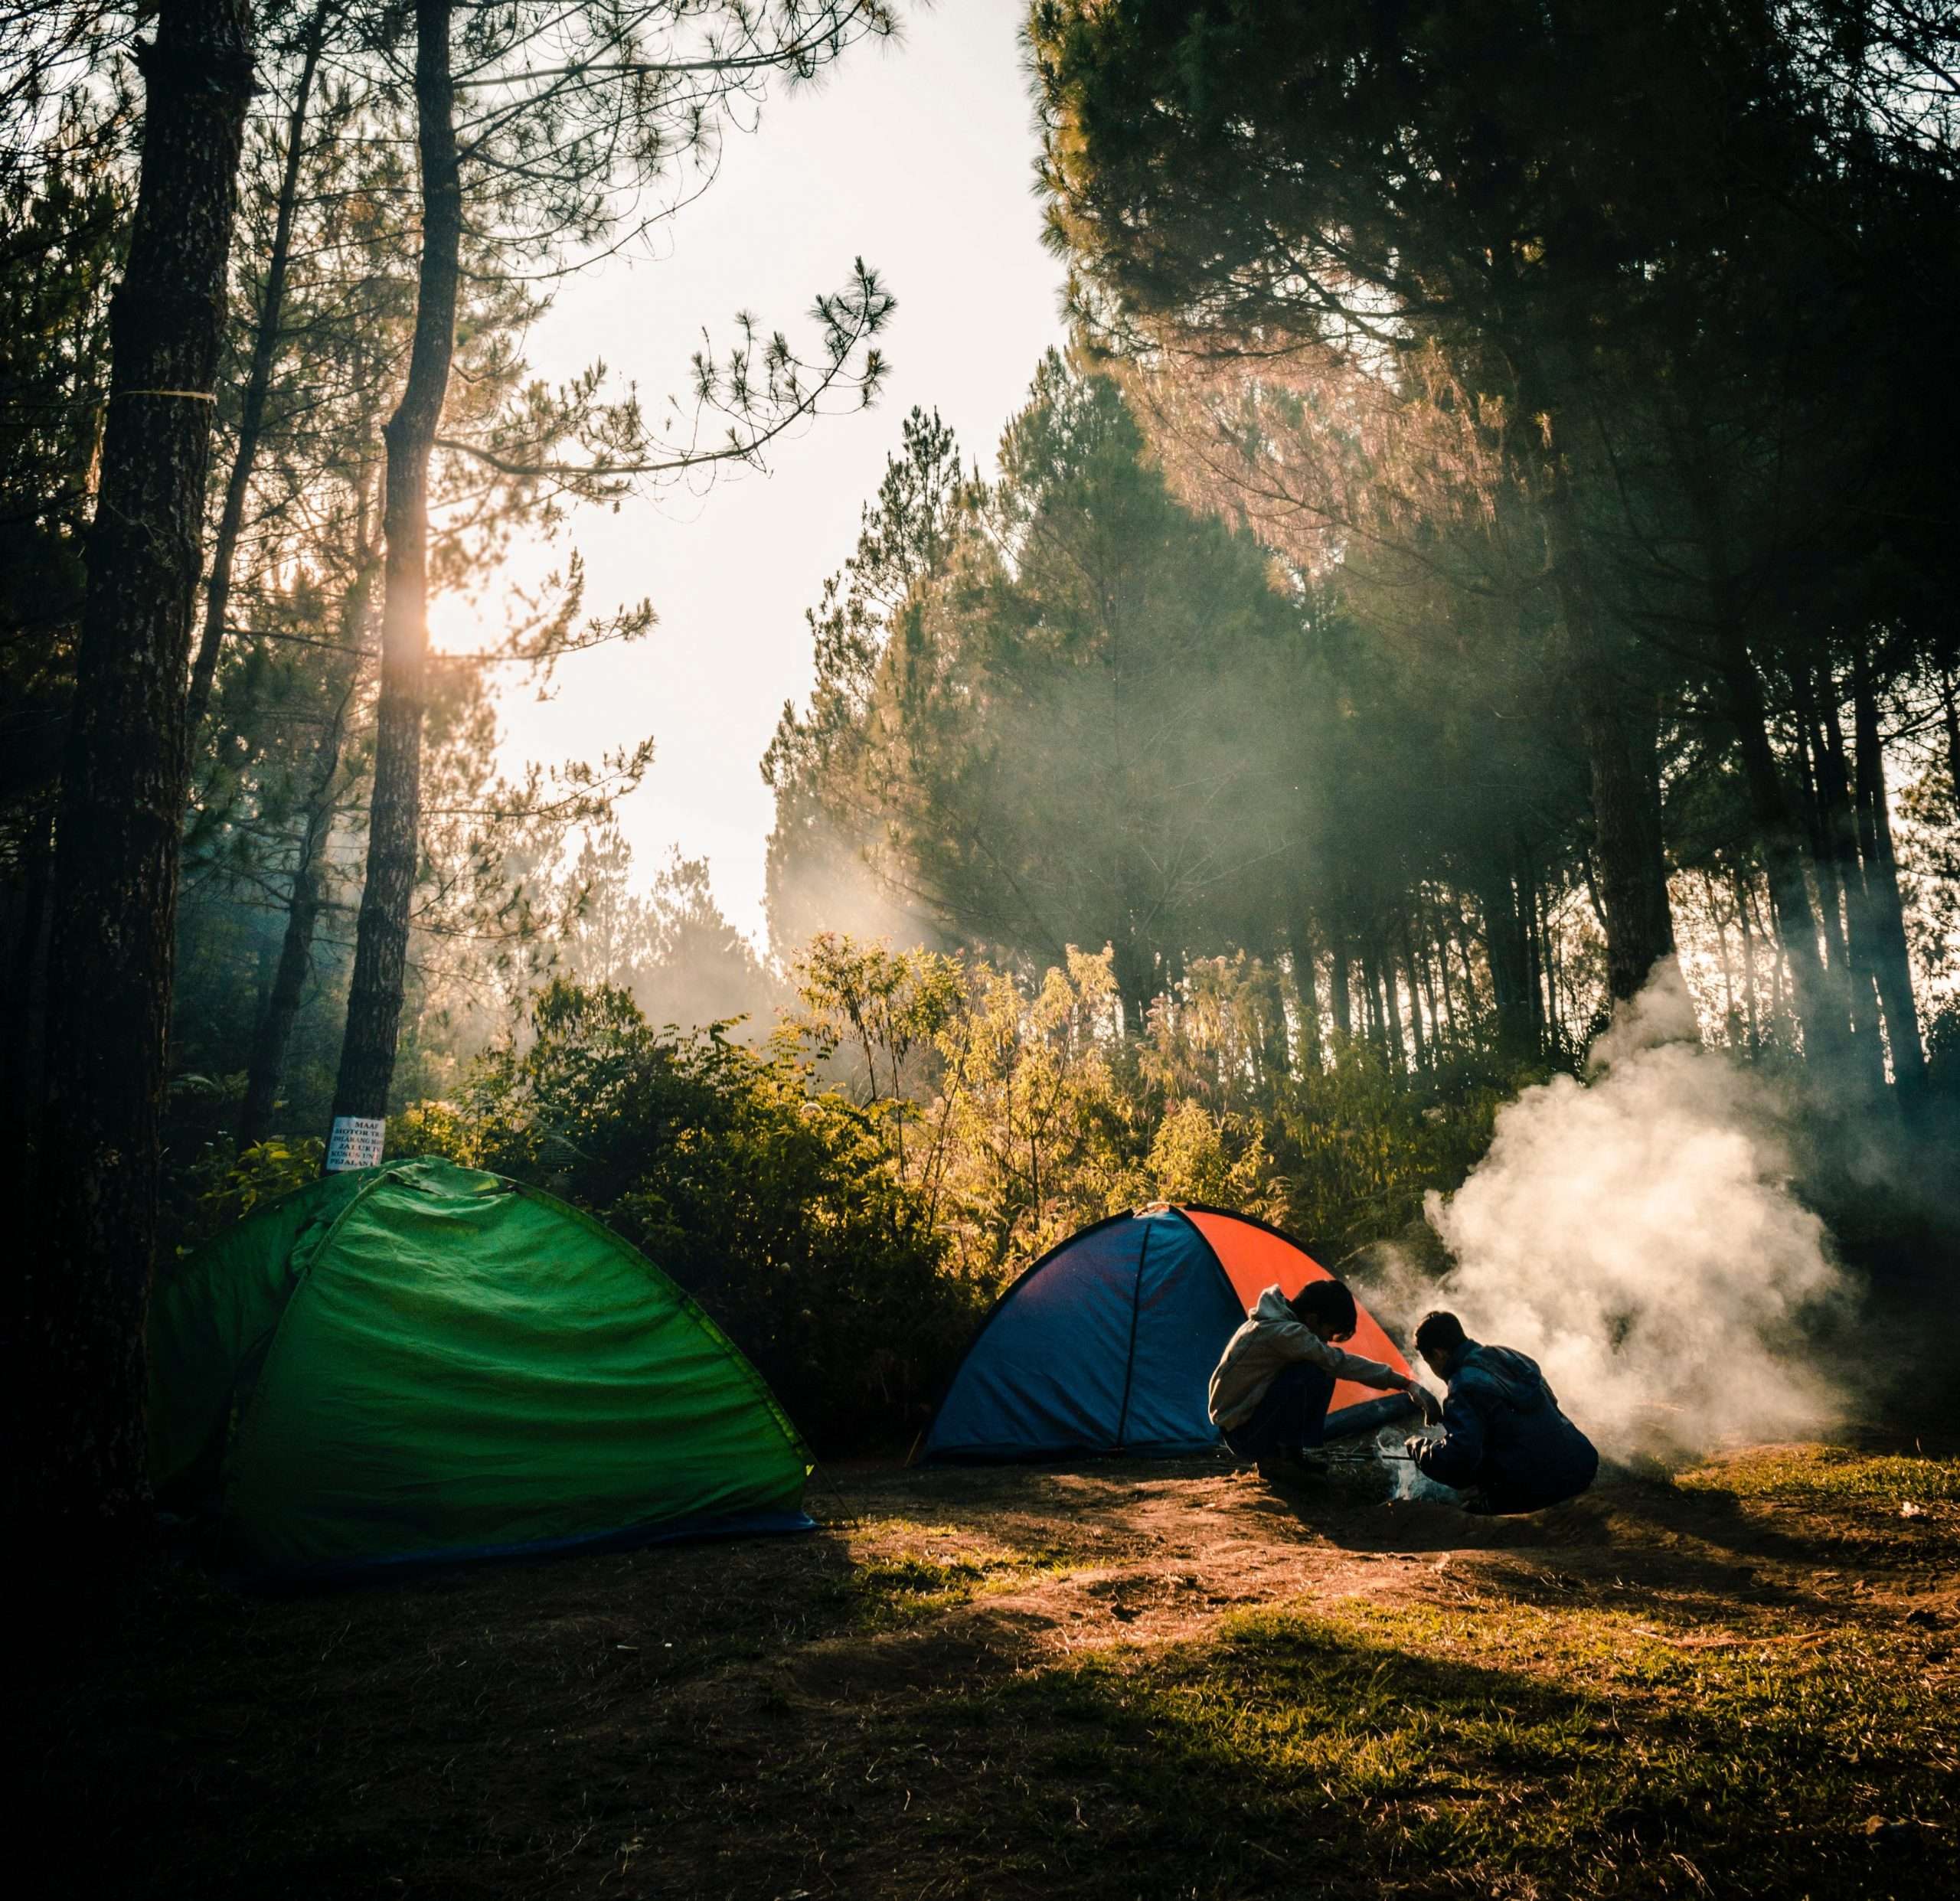 Pitch a Tent at These 18 Bay Area Camping Spots